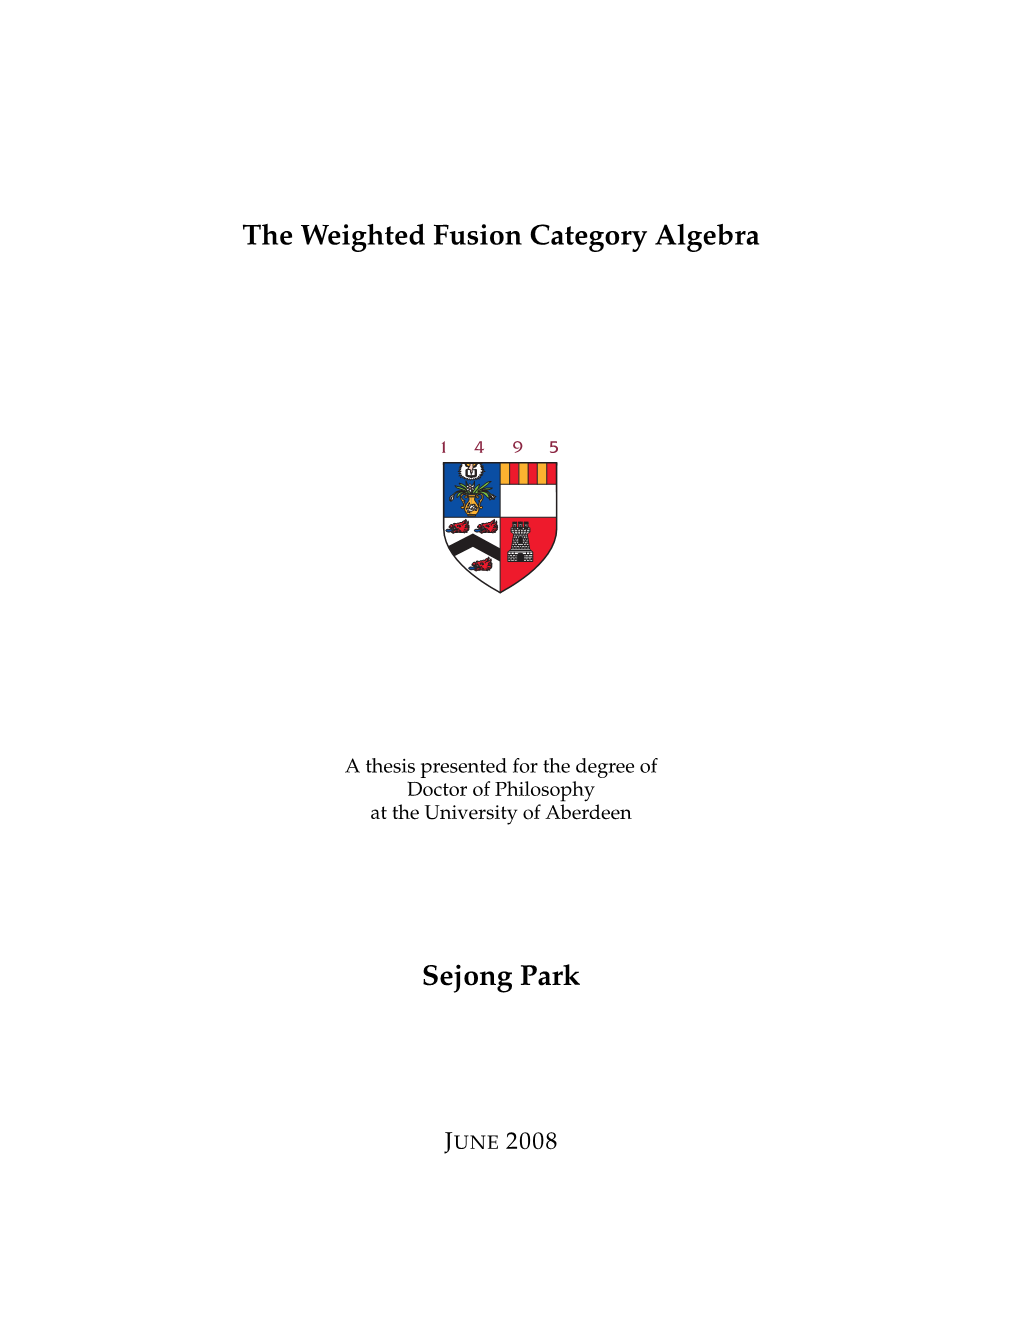 The Weighted Fusion Category Algebra